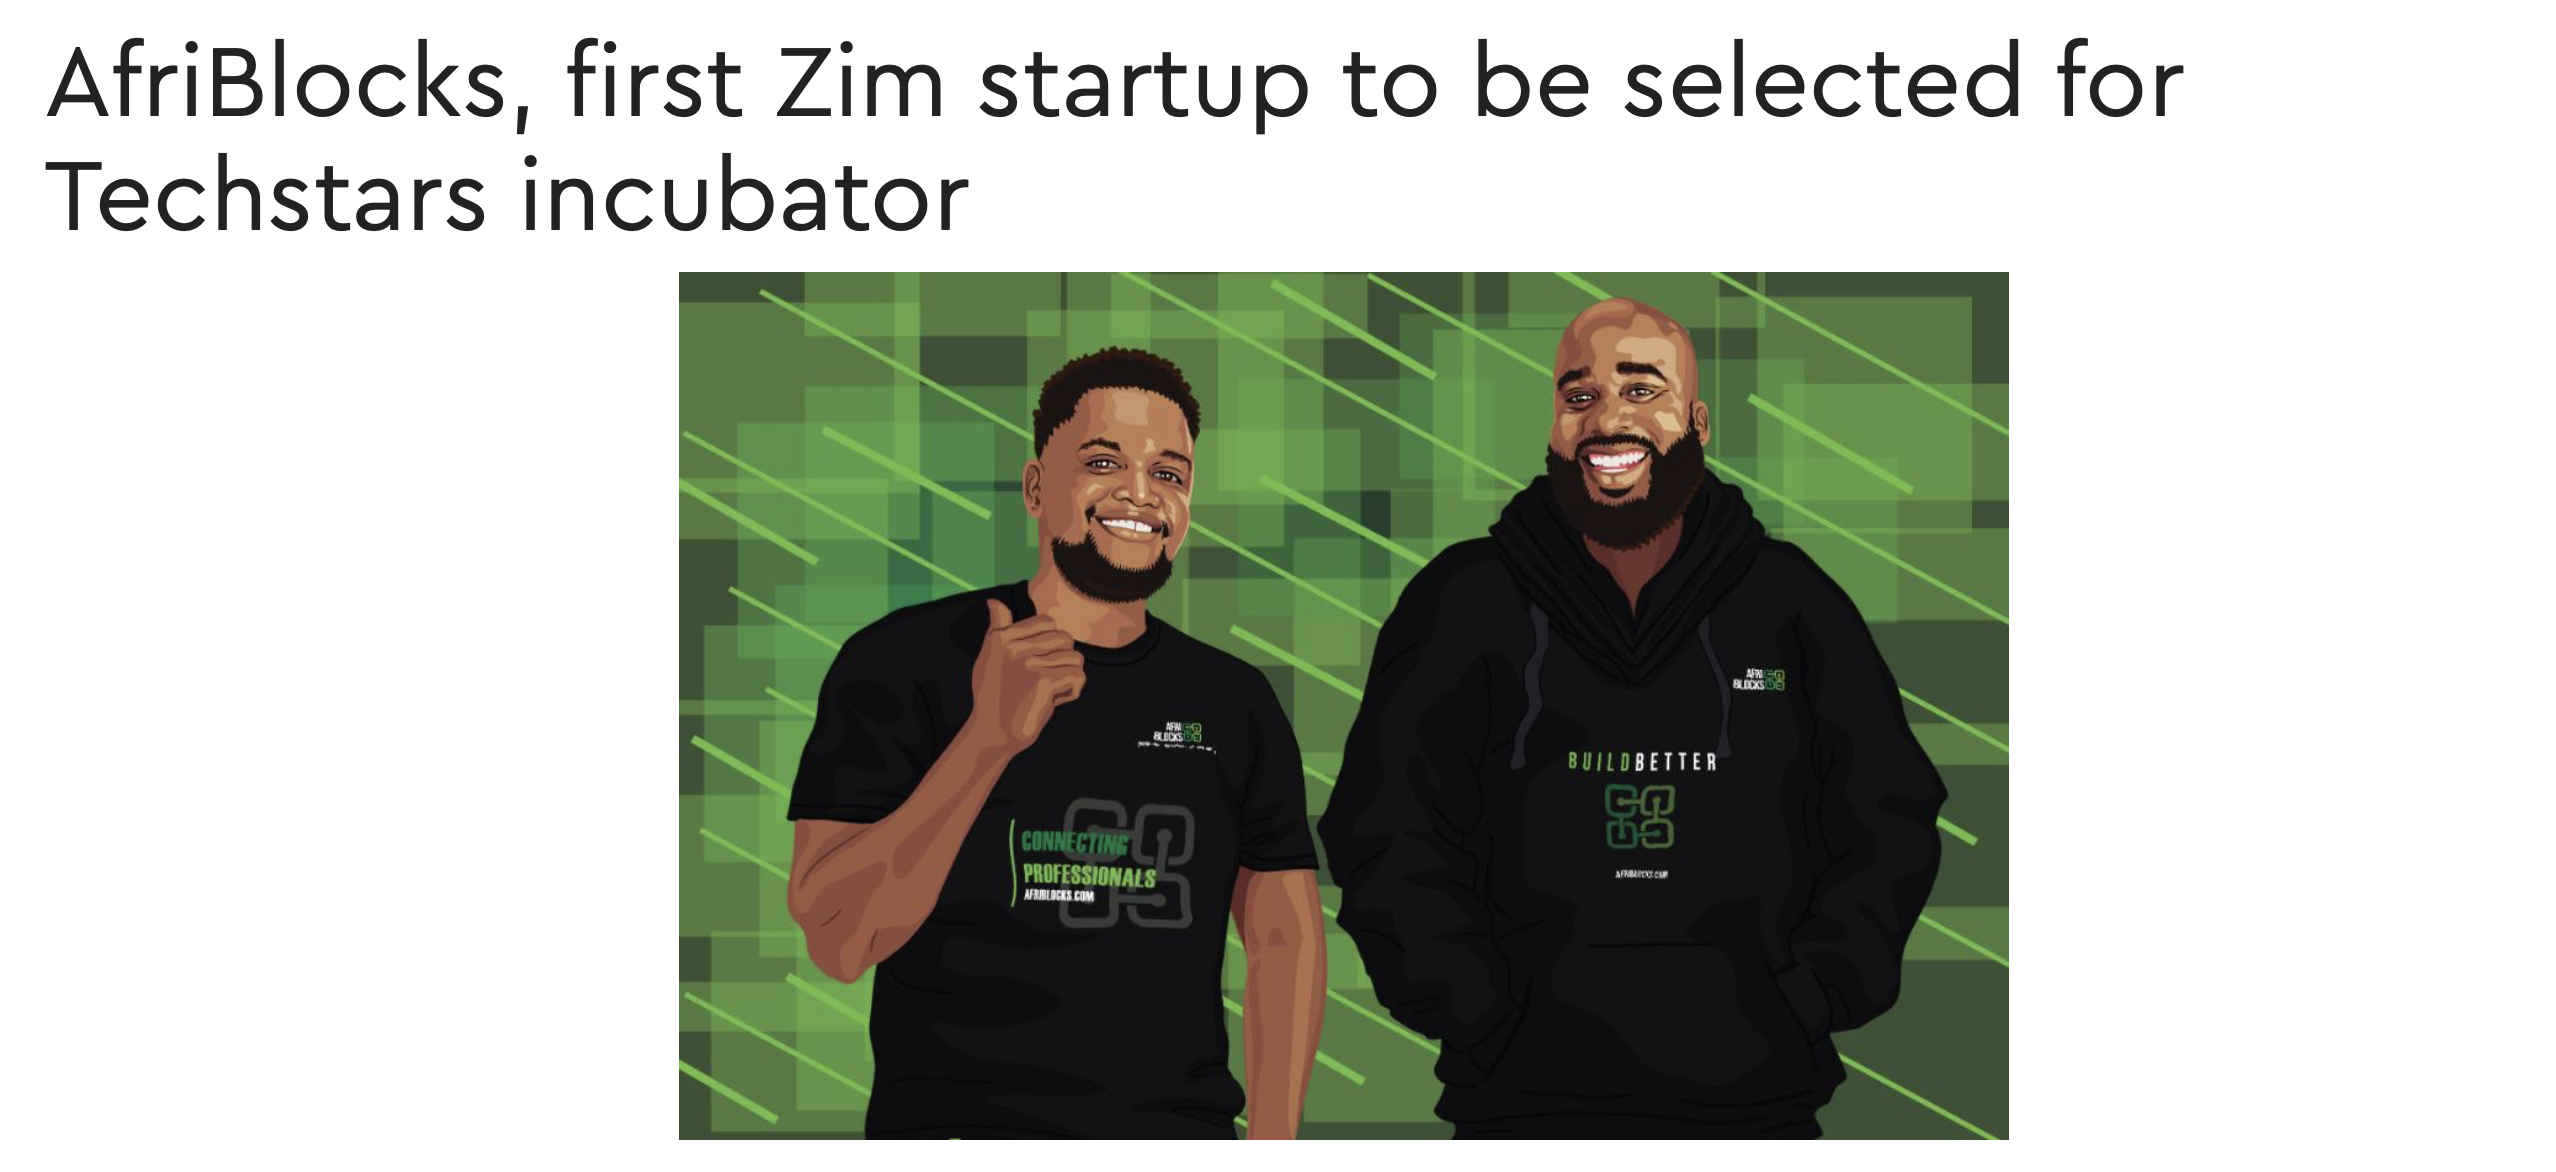 AfriBlocks, the First Zimbabwean Startup to be Selected for Techstars Incubator